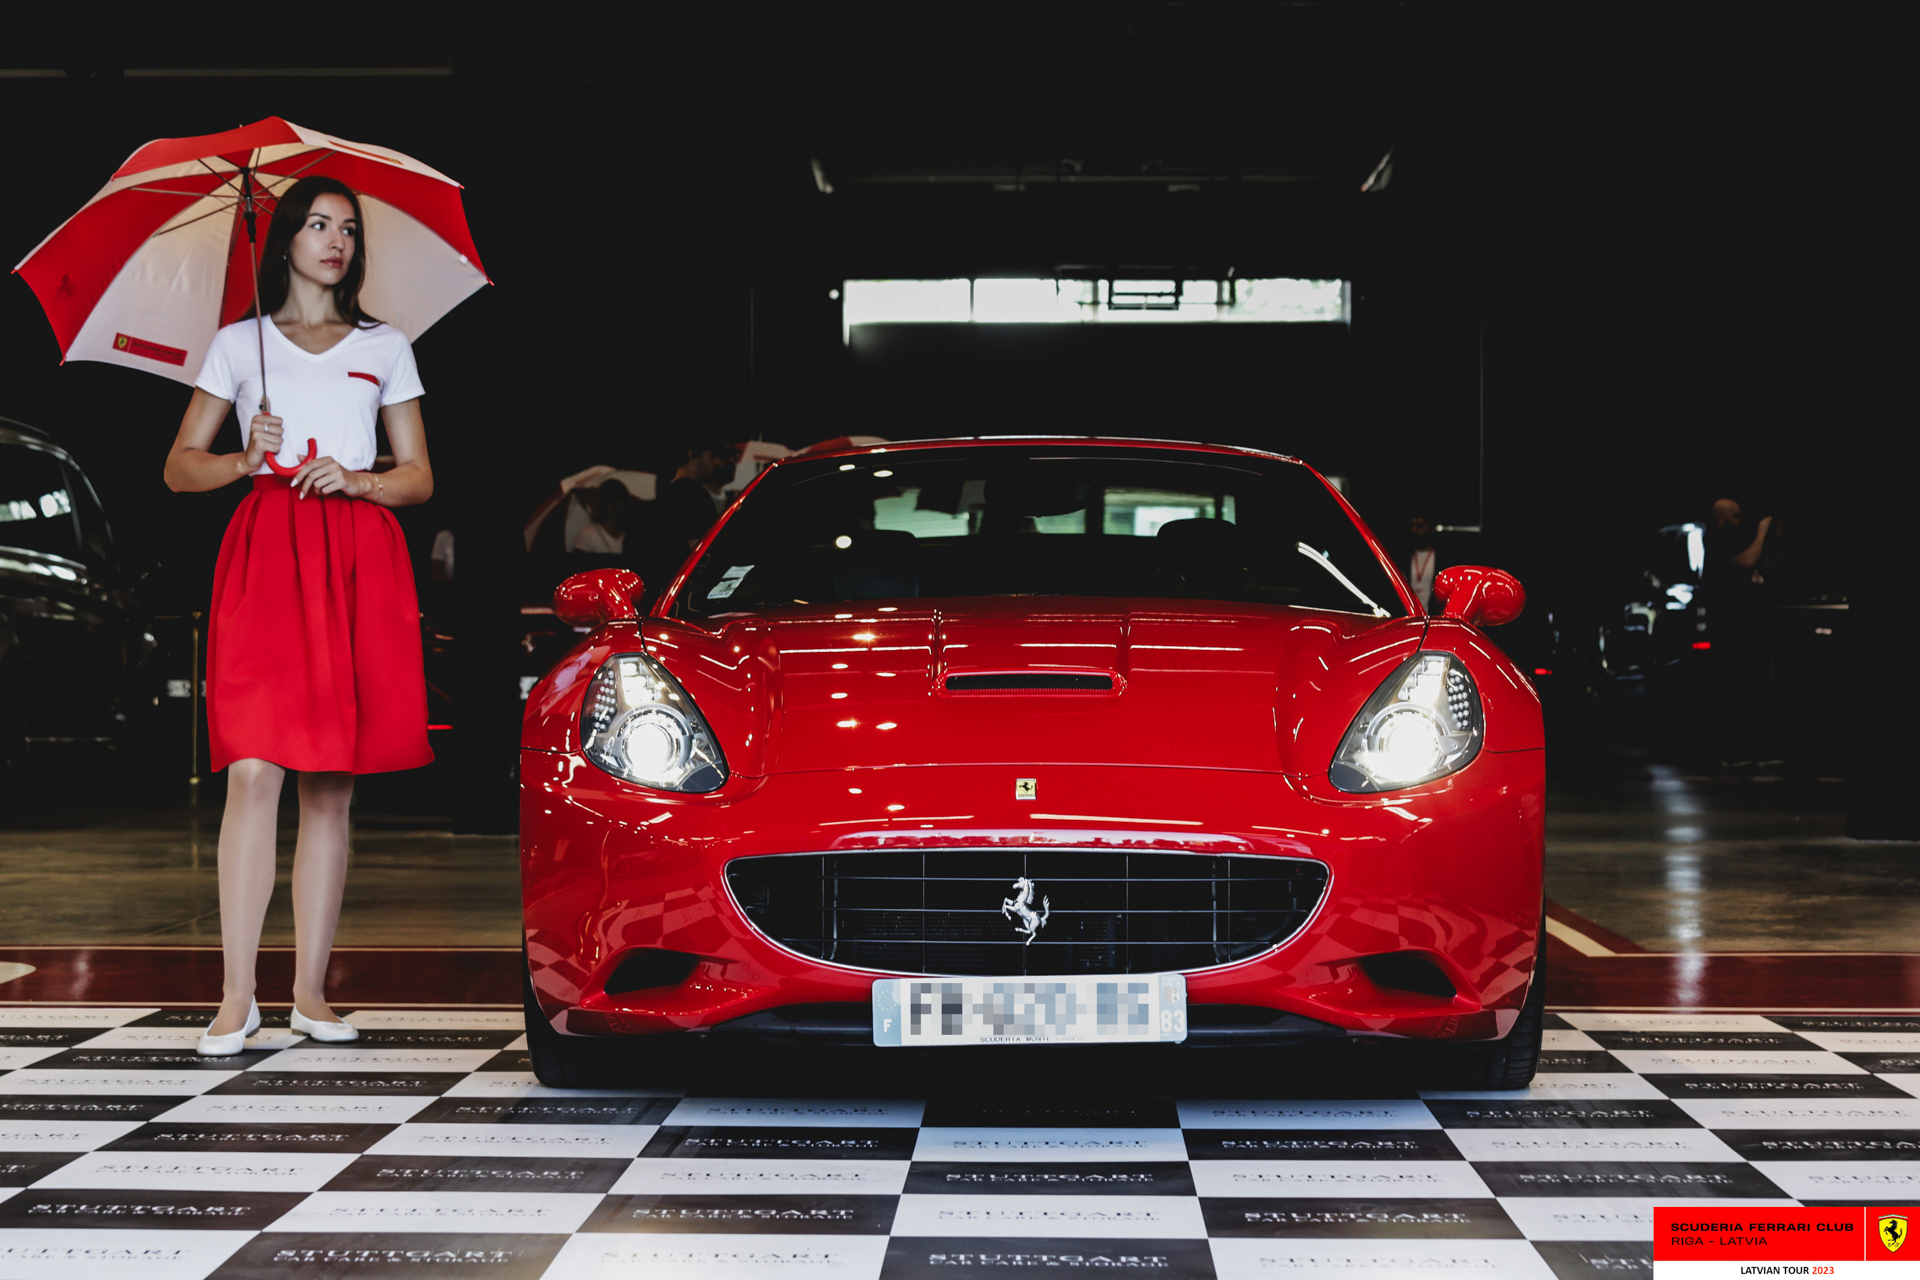 A grid girl and a red Ferrari ready to start the tour.